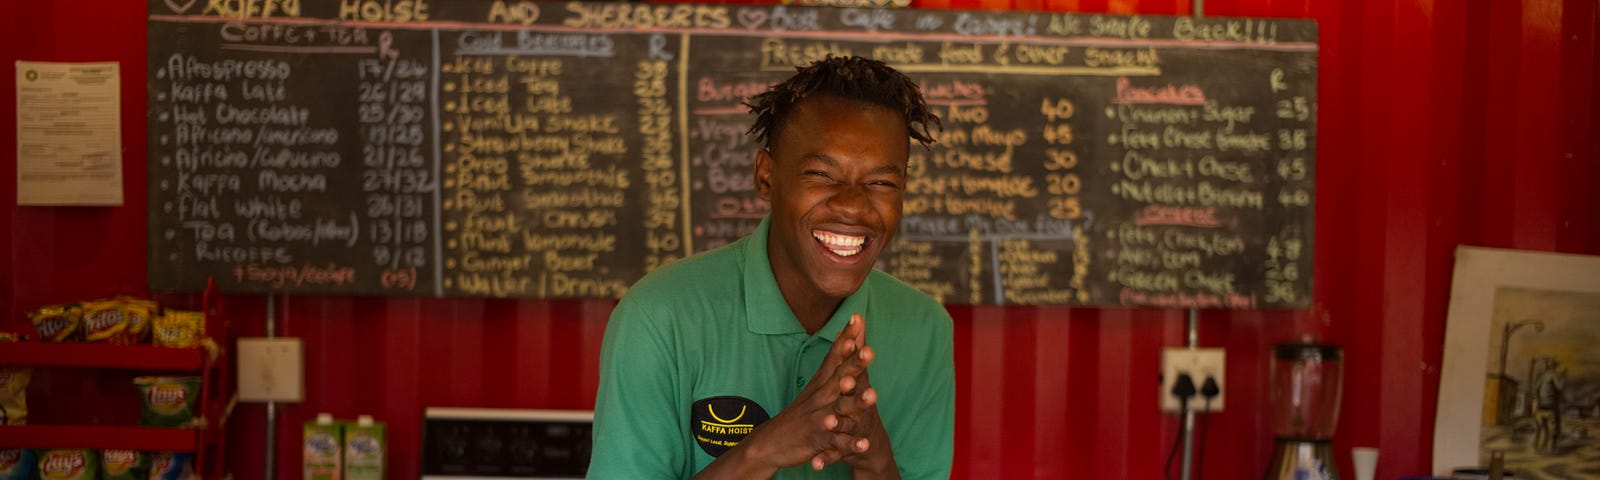 A very happy young man, with the cutest smile in the world, behind a sandwich counter, ready to take your order.